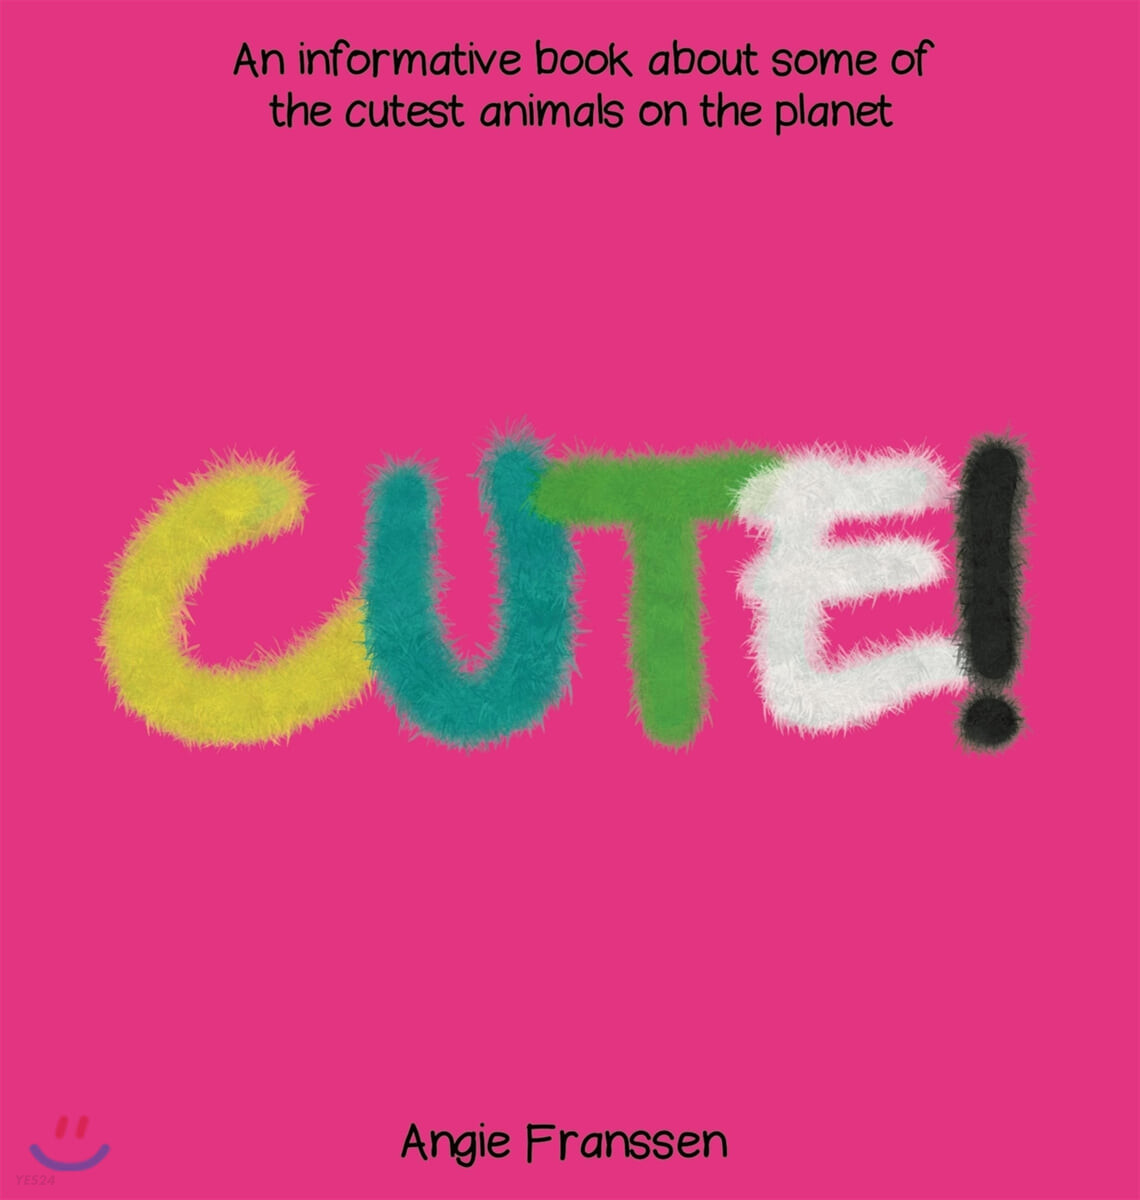 Cute!: An informative book about some of the cutest animals on the planet